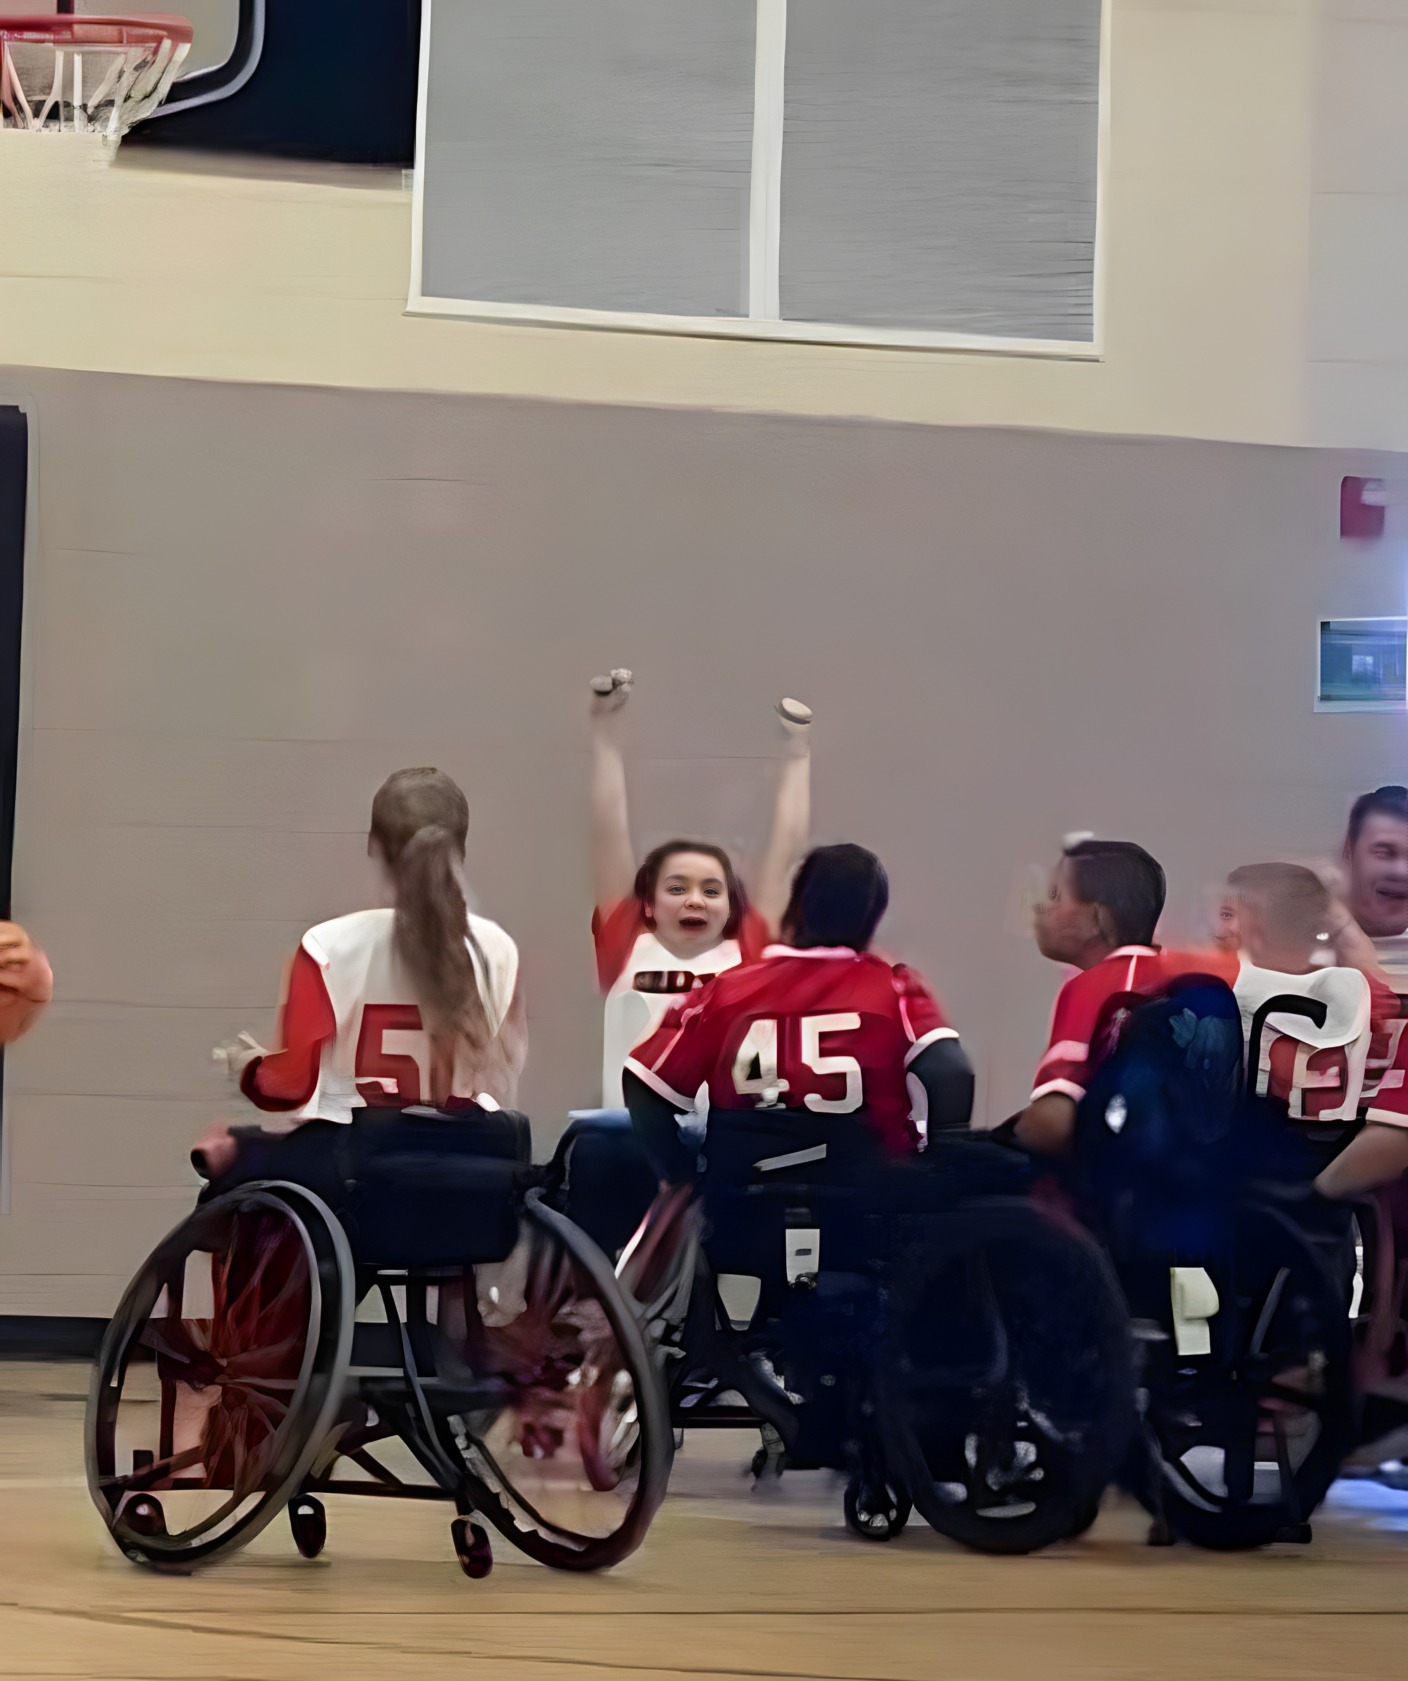 Adaptive sports Team of teens in wheelchairs in red ans white jerseys play on an indoor basketball court.